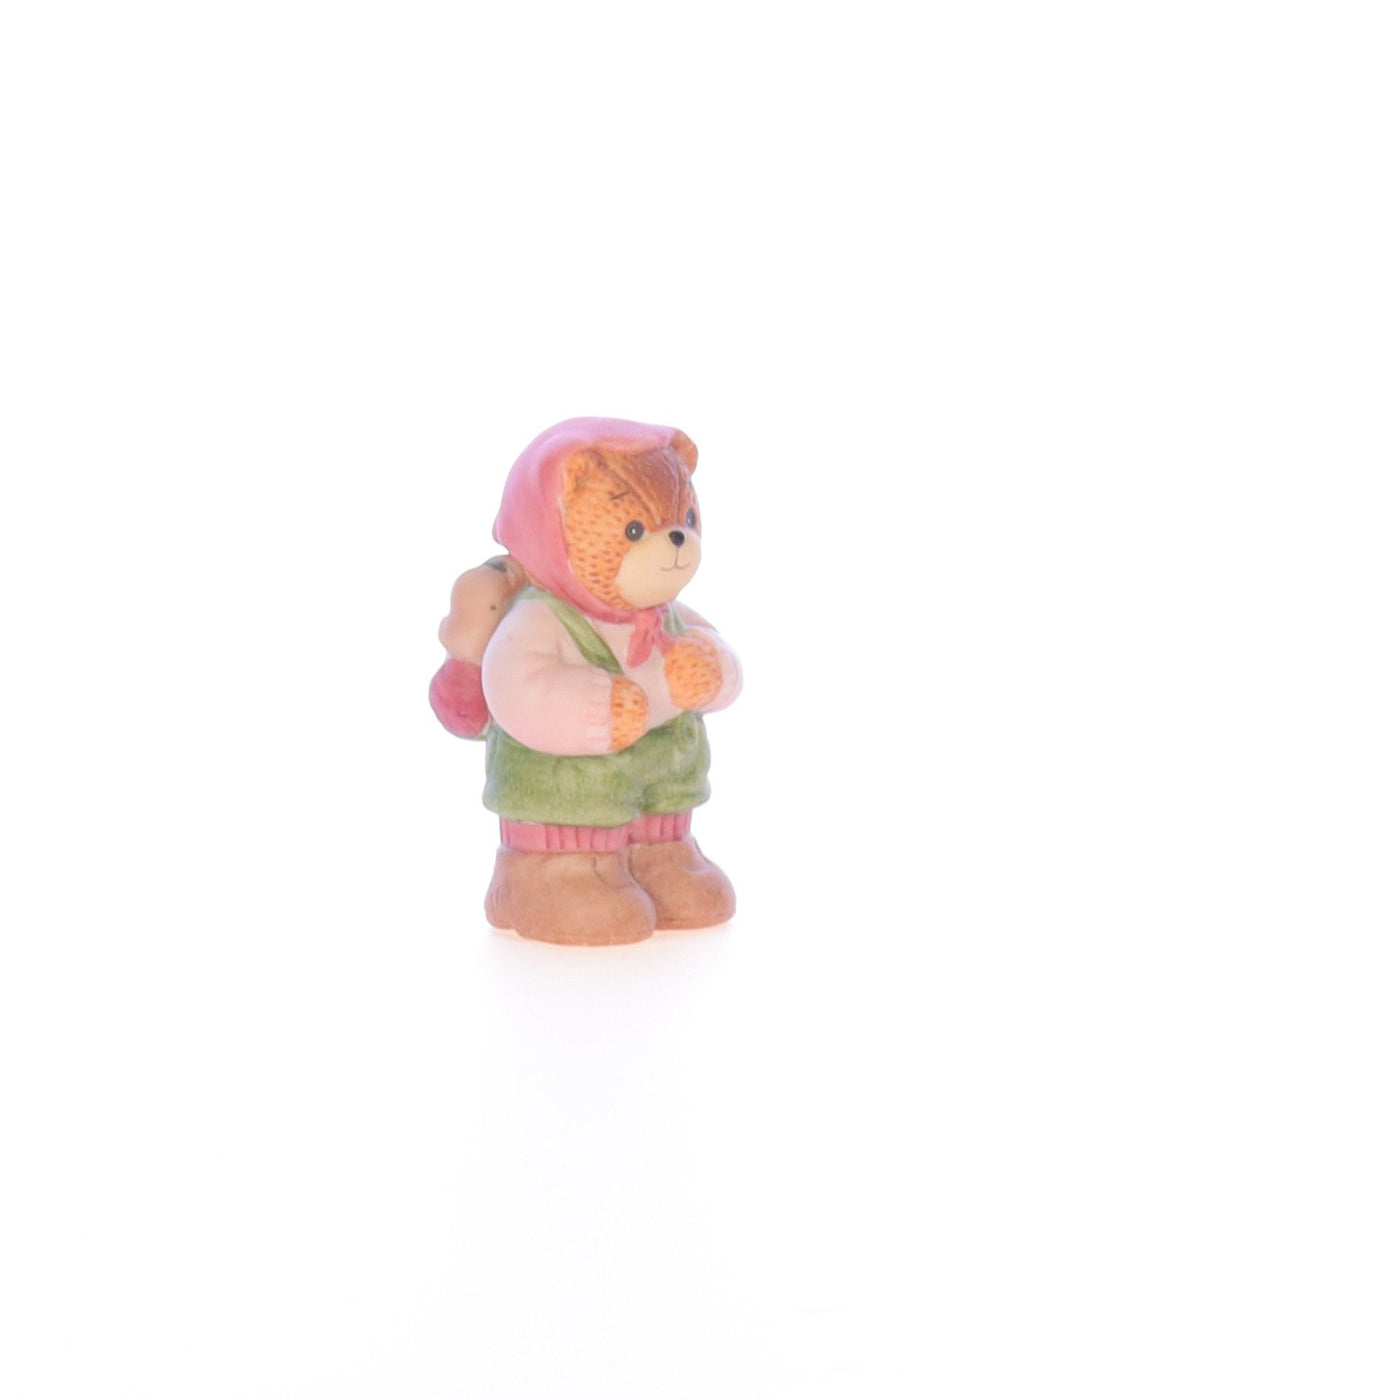 Lucy_And_Me_by_Lucy_Atwell_Porcelain_Figurine_Hiking_Bear_Lucy_Unknown_036_08